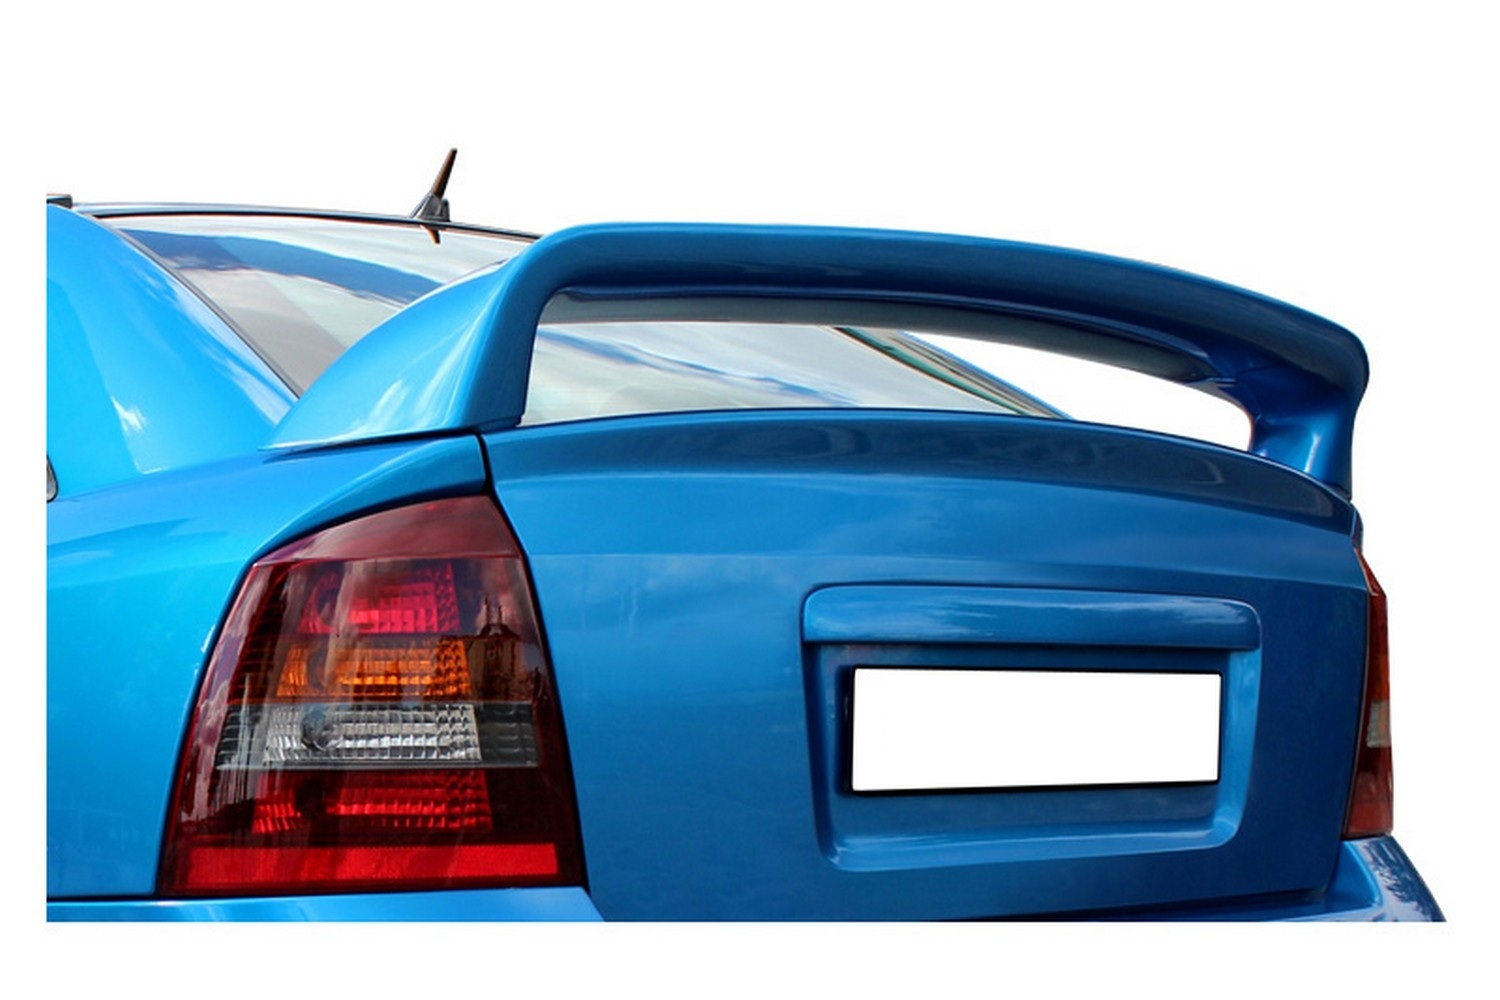 SPOILER REAR TRUNK BOOT TAILGATE OPEL VAUXHALL ASTRA G hb WING